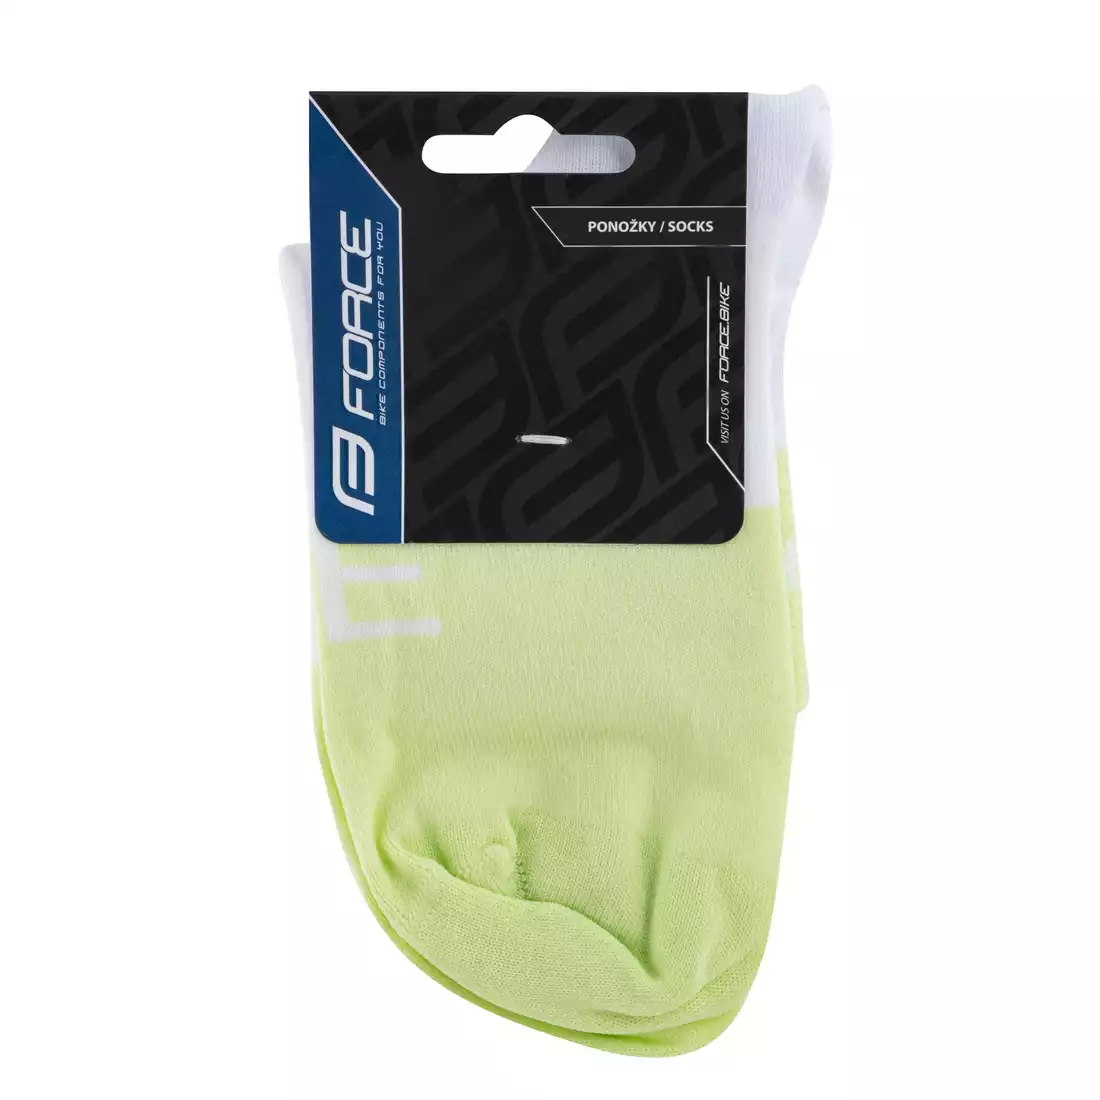 FORCE ONE Bicycle socks, green and white